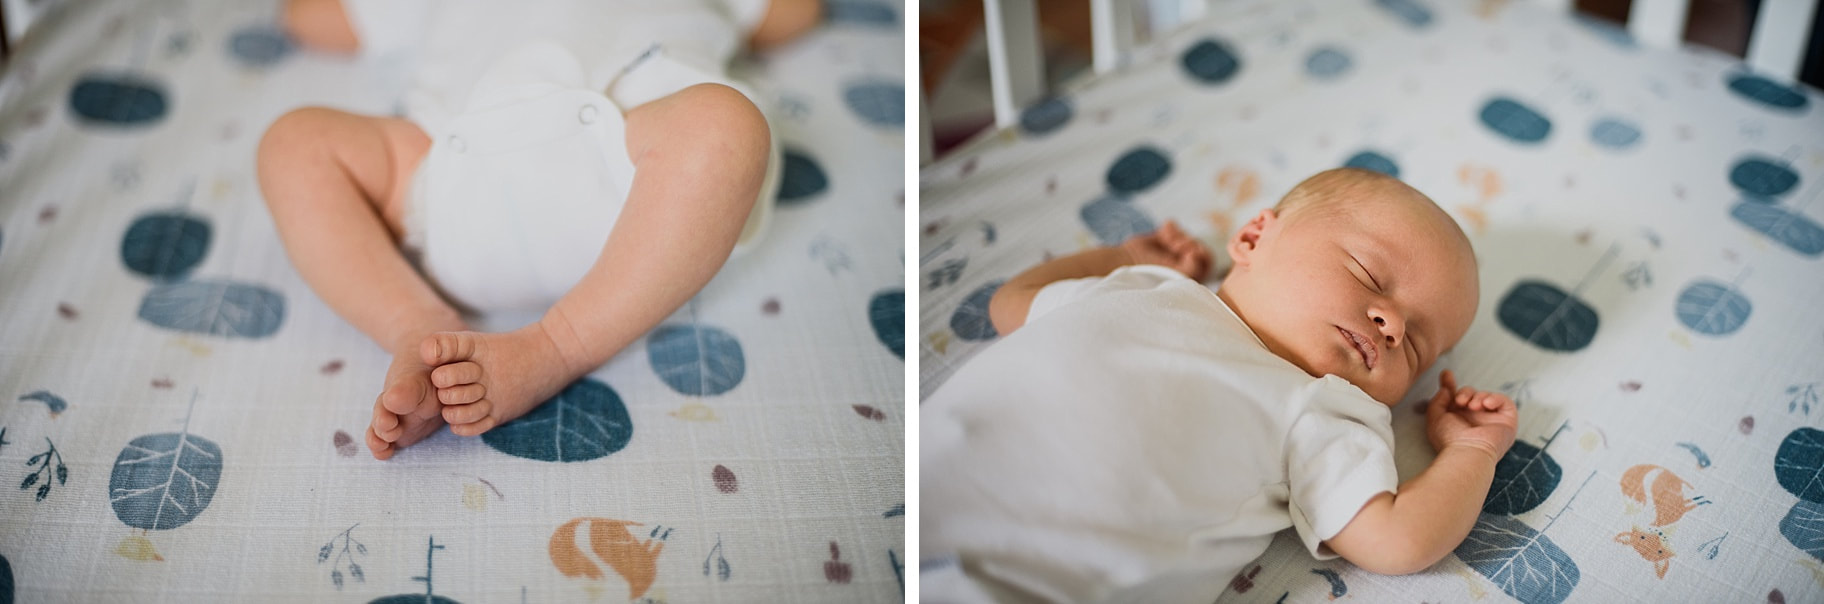 Baby asleep in his crib during a lifestyle, at-home newborn photography session in Roanoke, Virginia